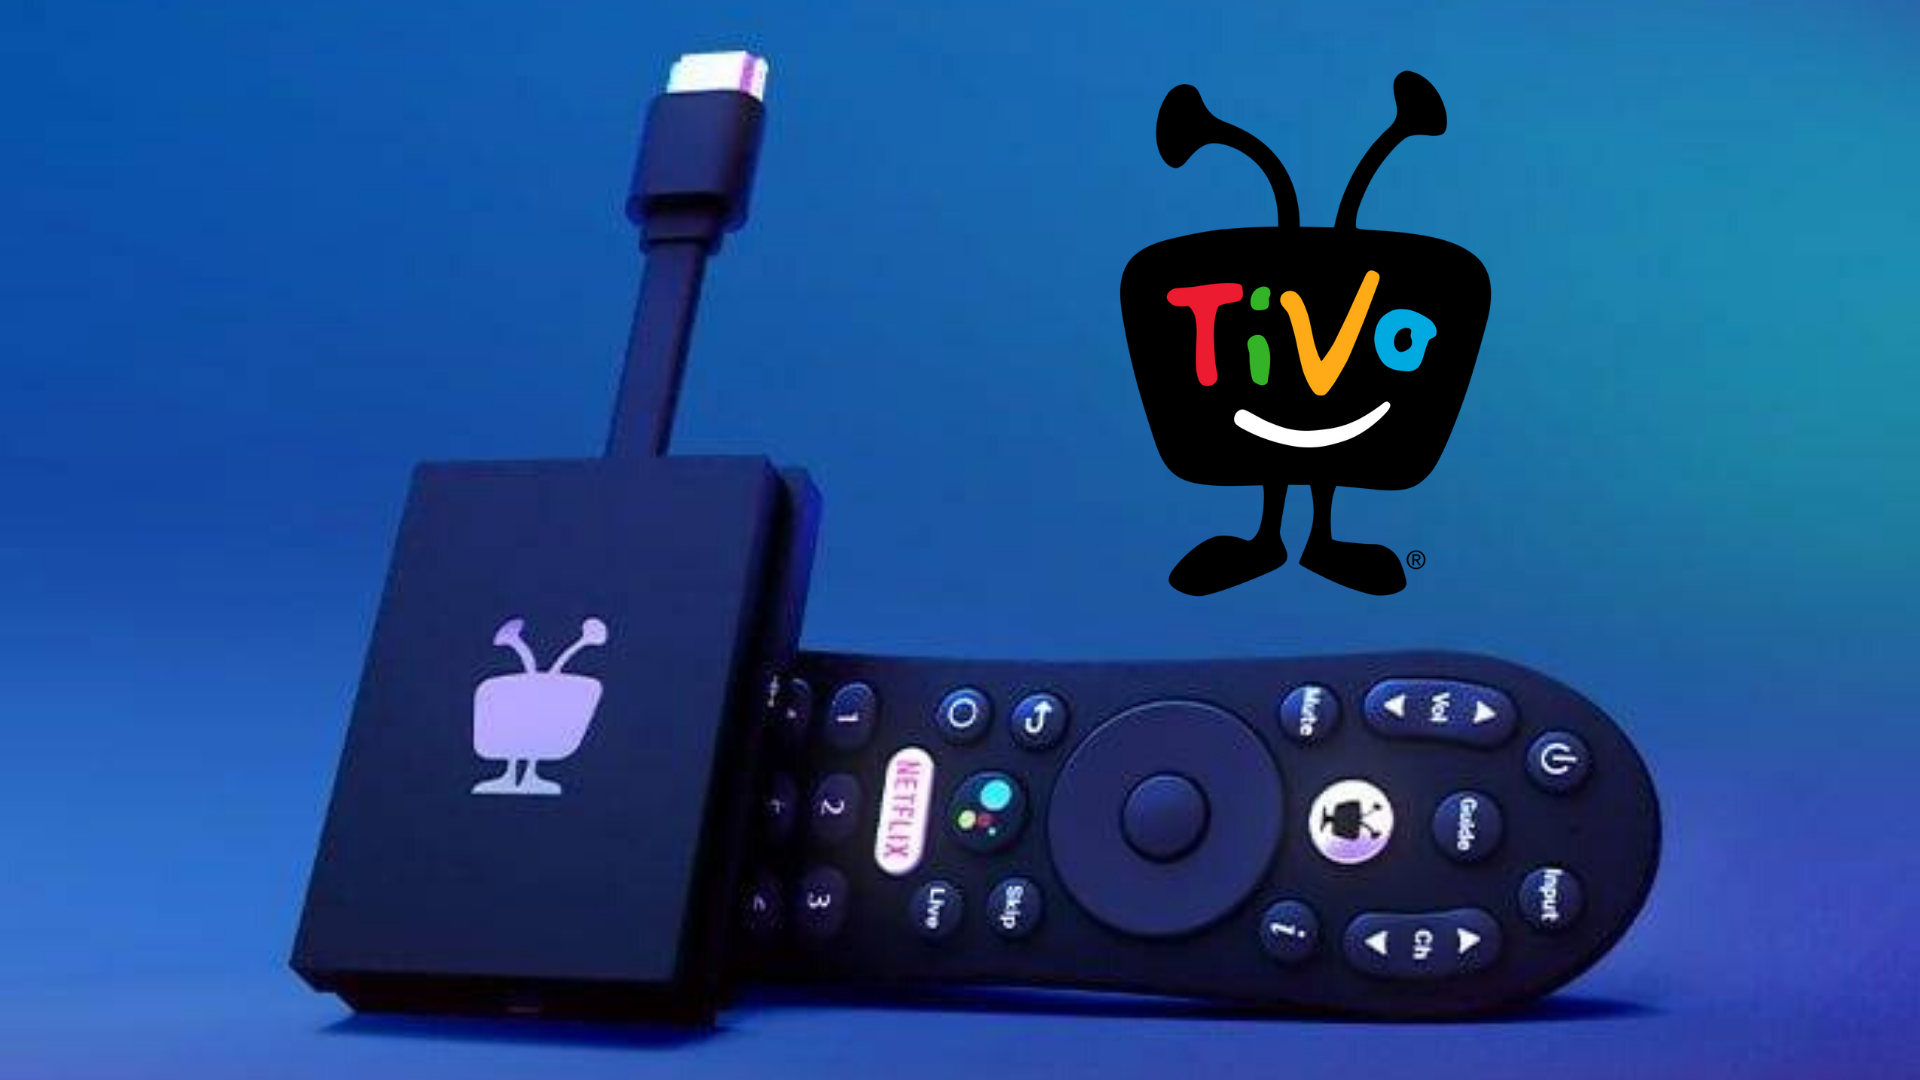 TiVo’s streaming-focused Stream 4K released, ViacomCBS Beats Revenue & Profit Estimates and other top news